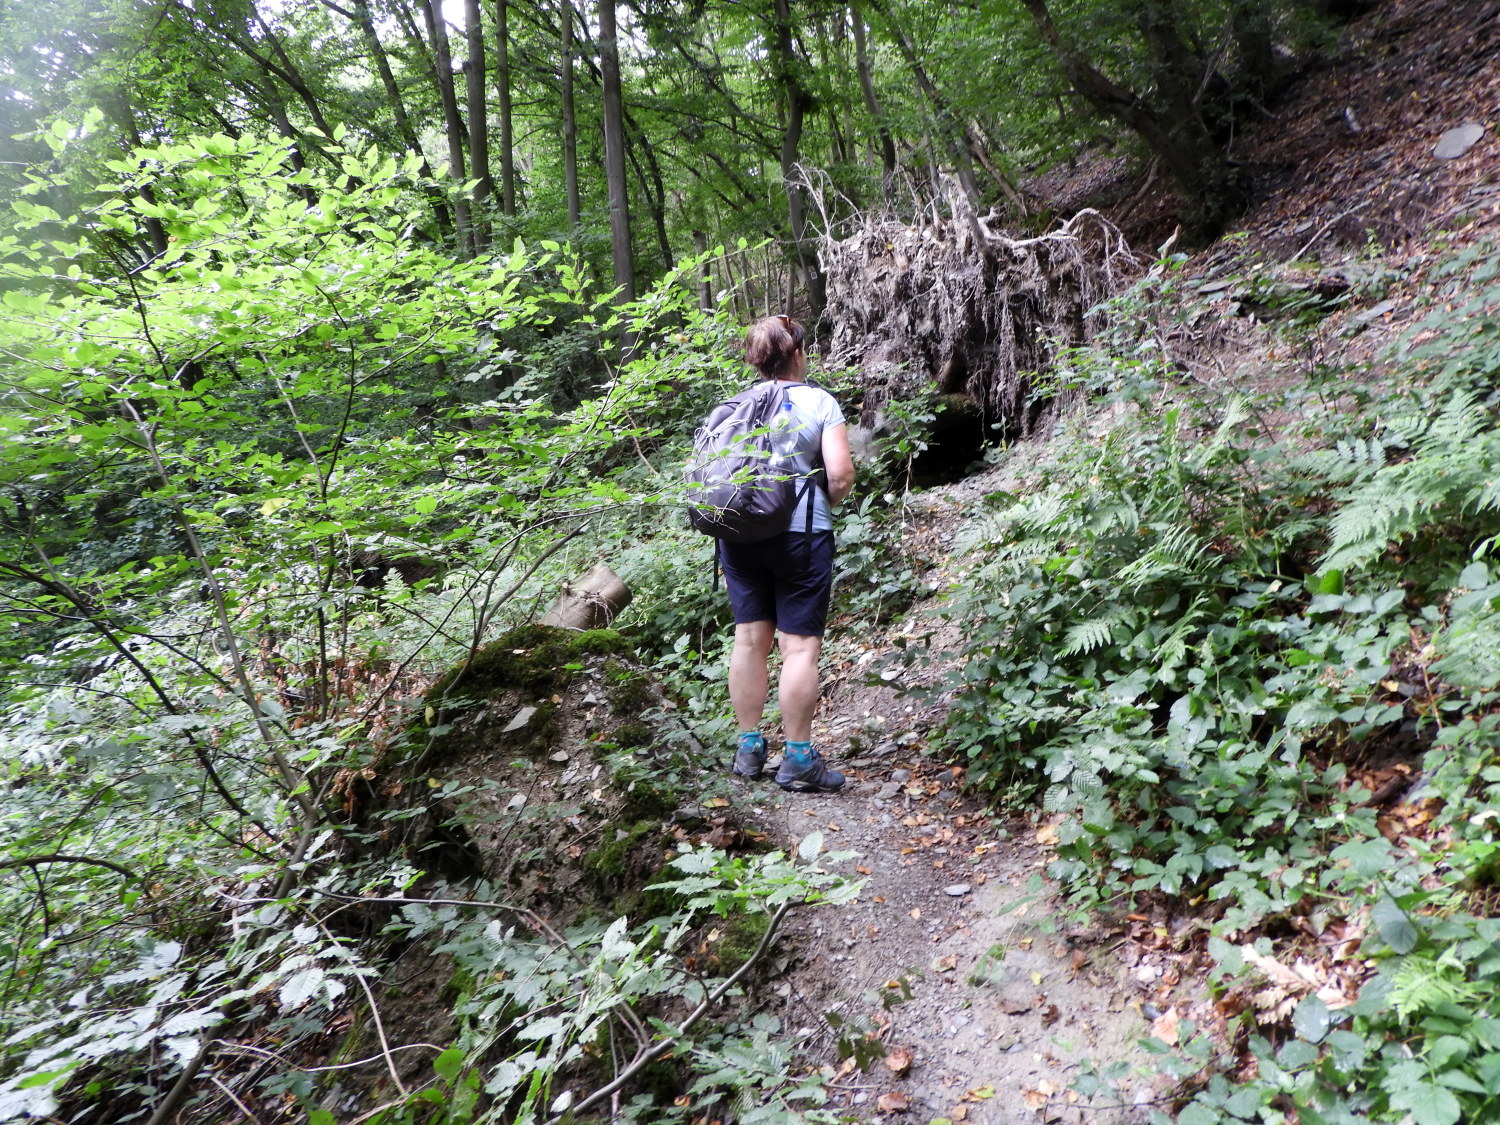 Blockage on the rising path to Hirzenach